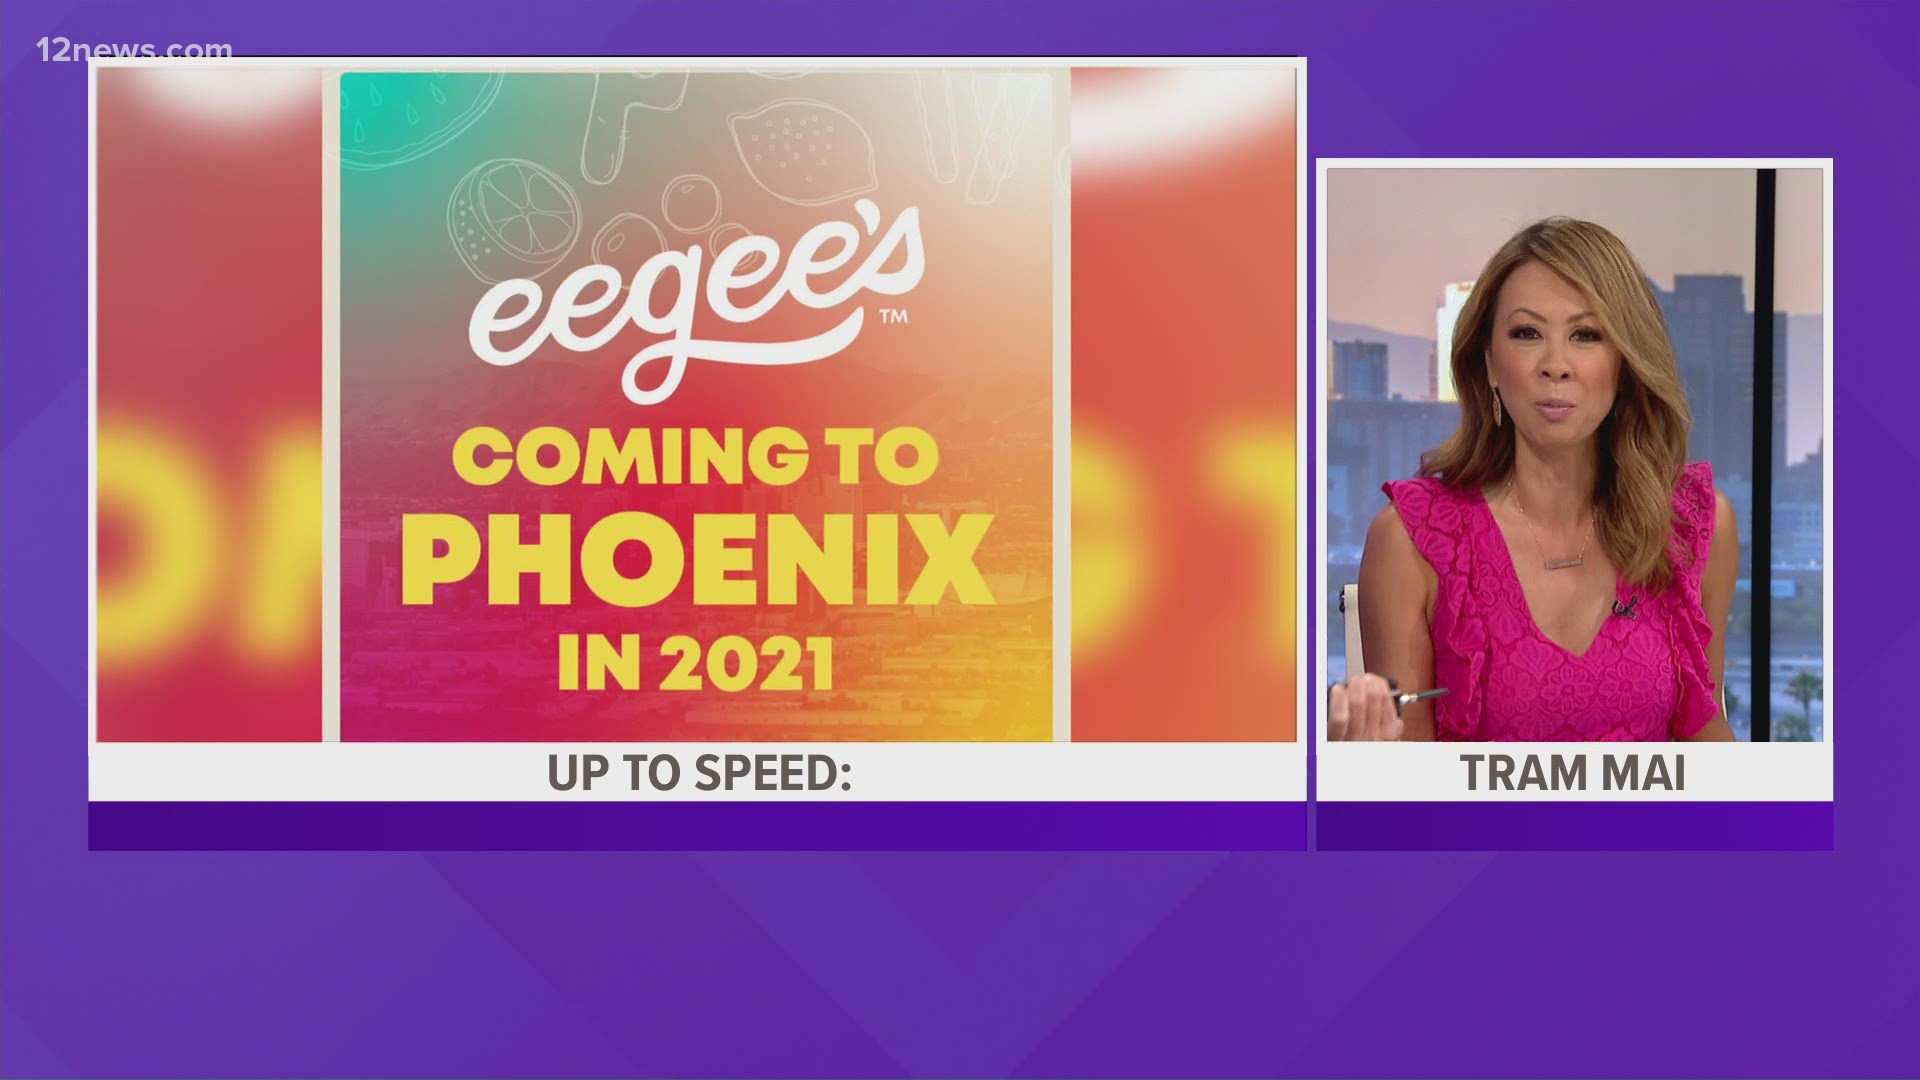 Southern Arizona favorite Eegee's announced plans to open restaurants in the Phoenix area. Get up to speed with the news across Arizona.